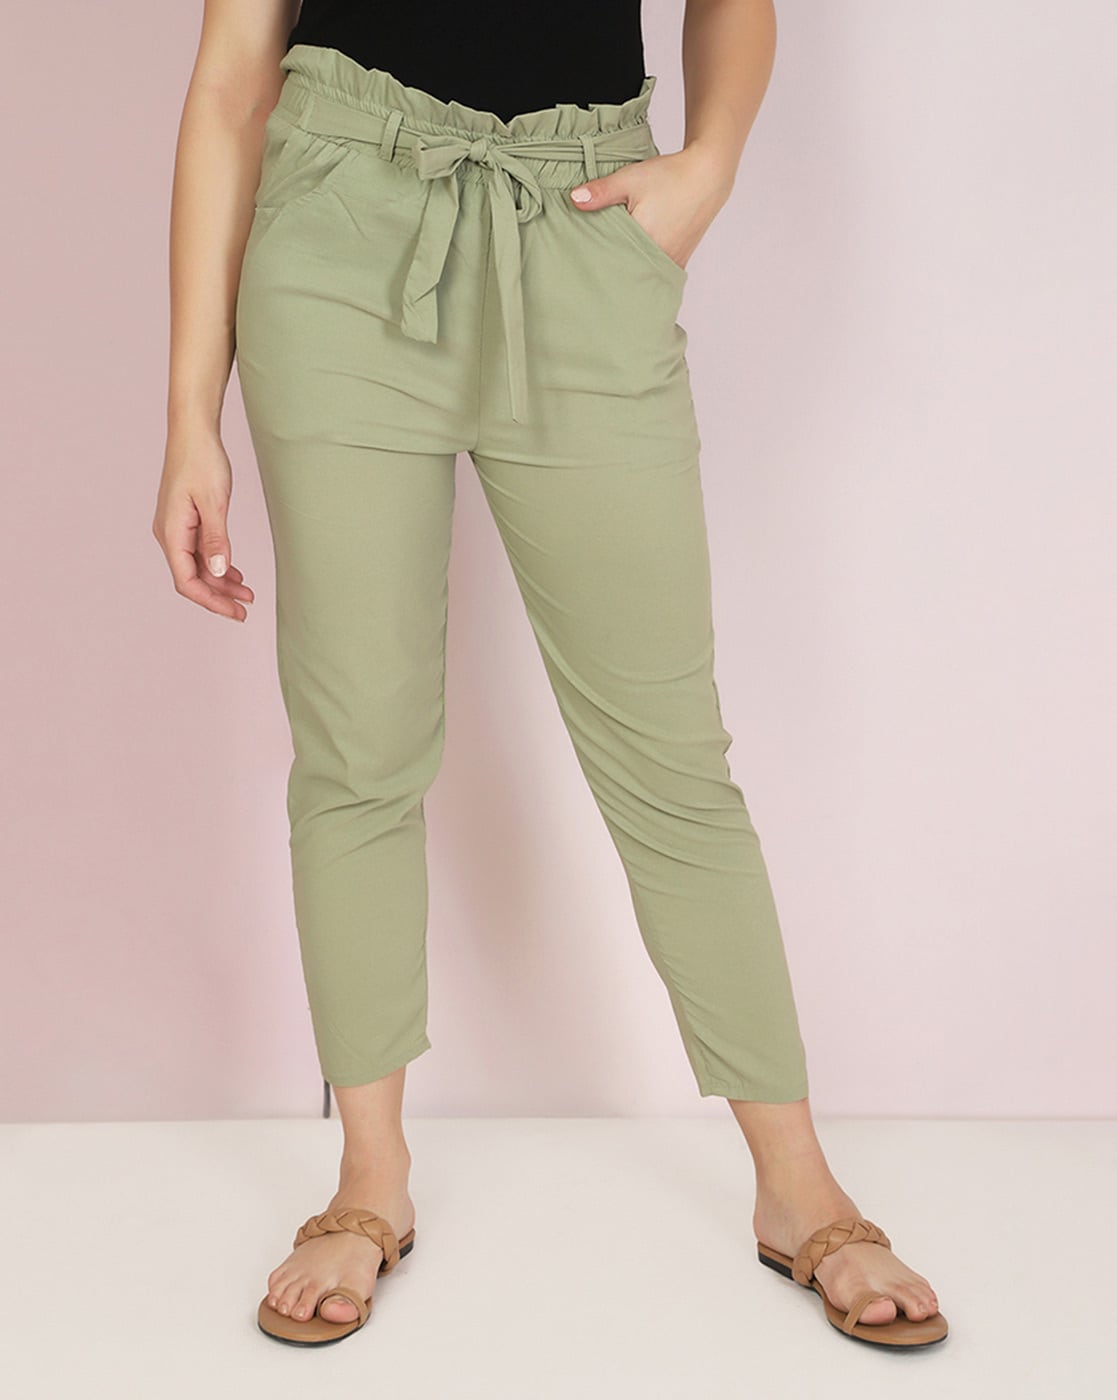 19+ Womens Green Pants Outfits (& Best Colors To Wear With!)